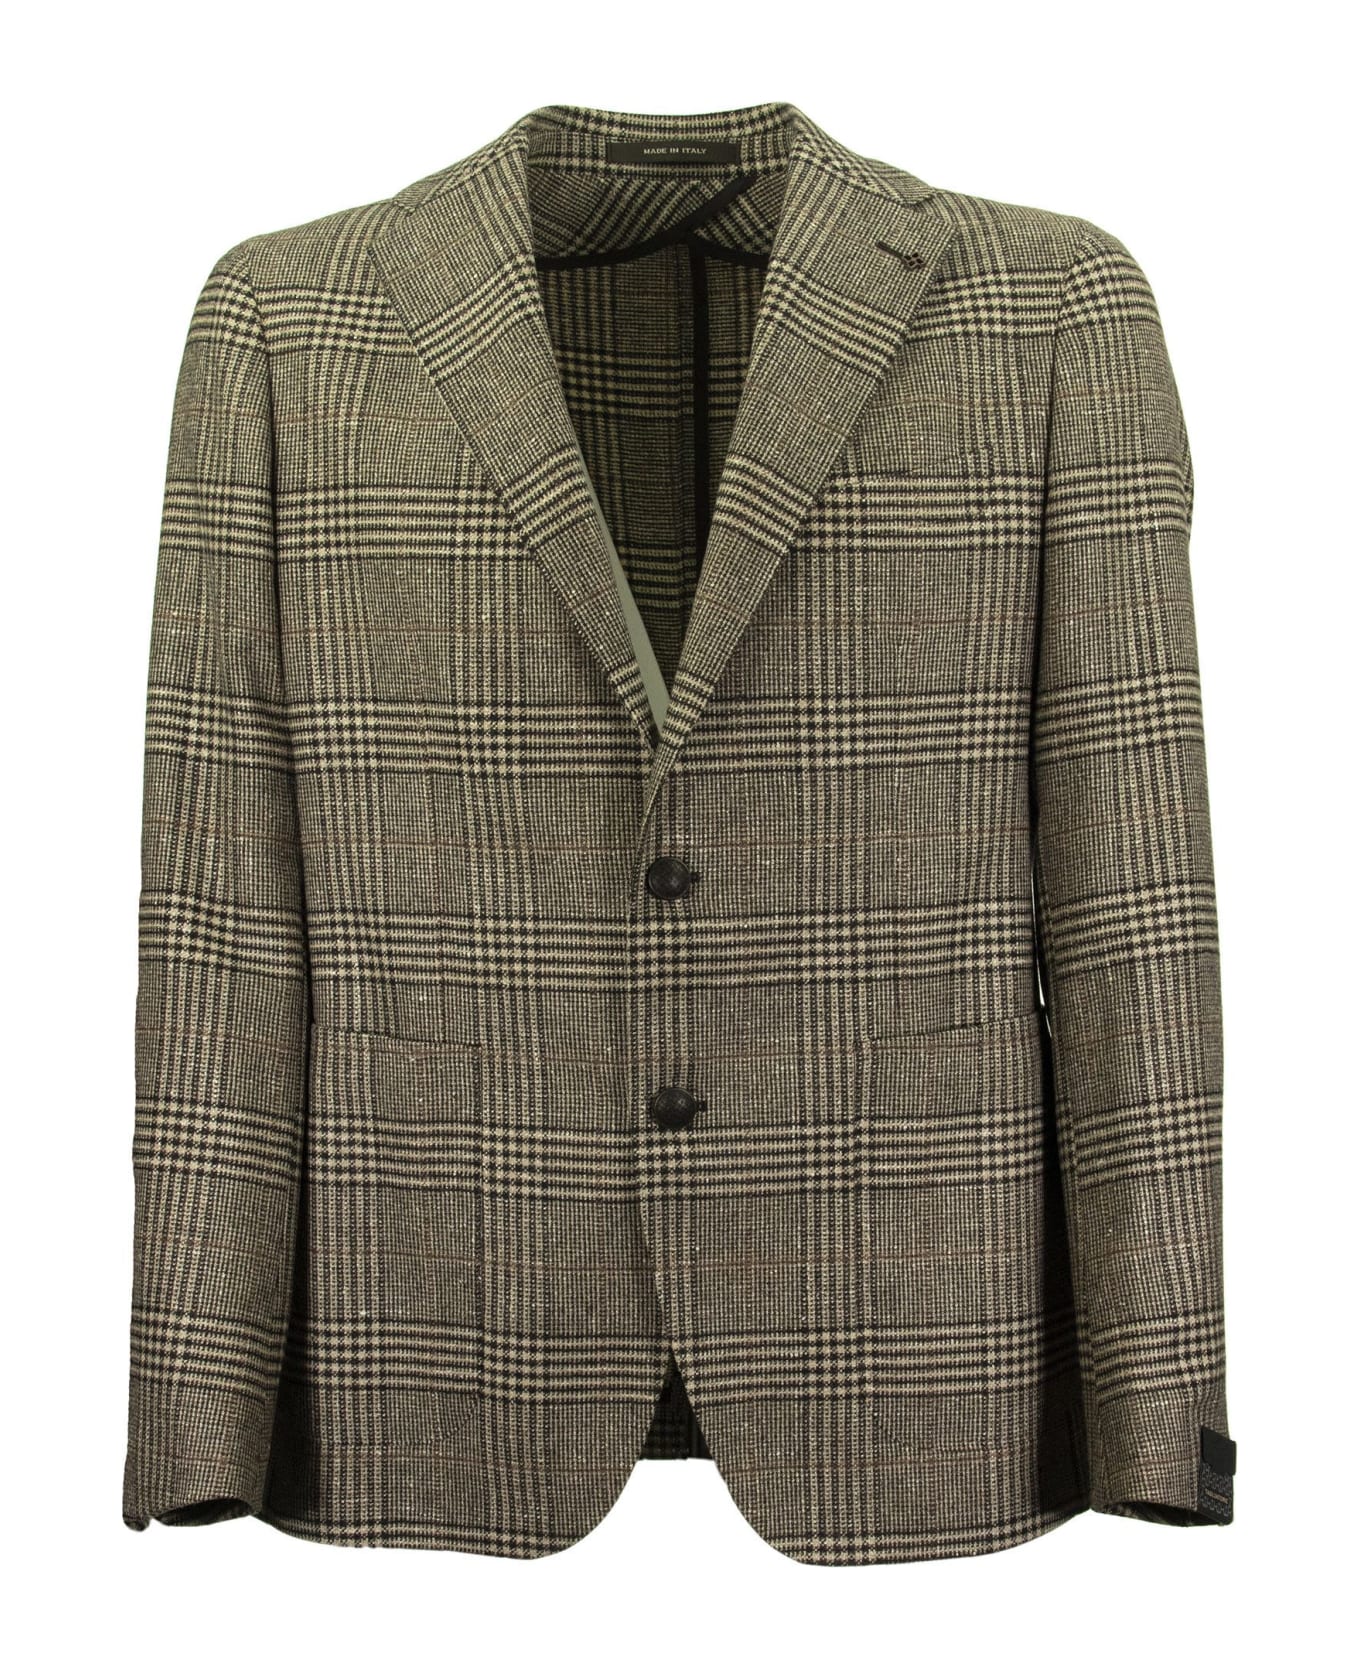 Tagliatore Prince Of Wales Jacket In Wool, Silk And Cashmere - Brown/beige